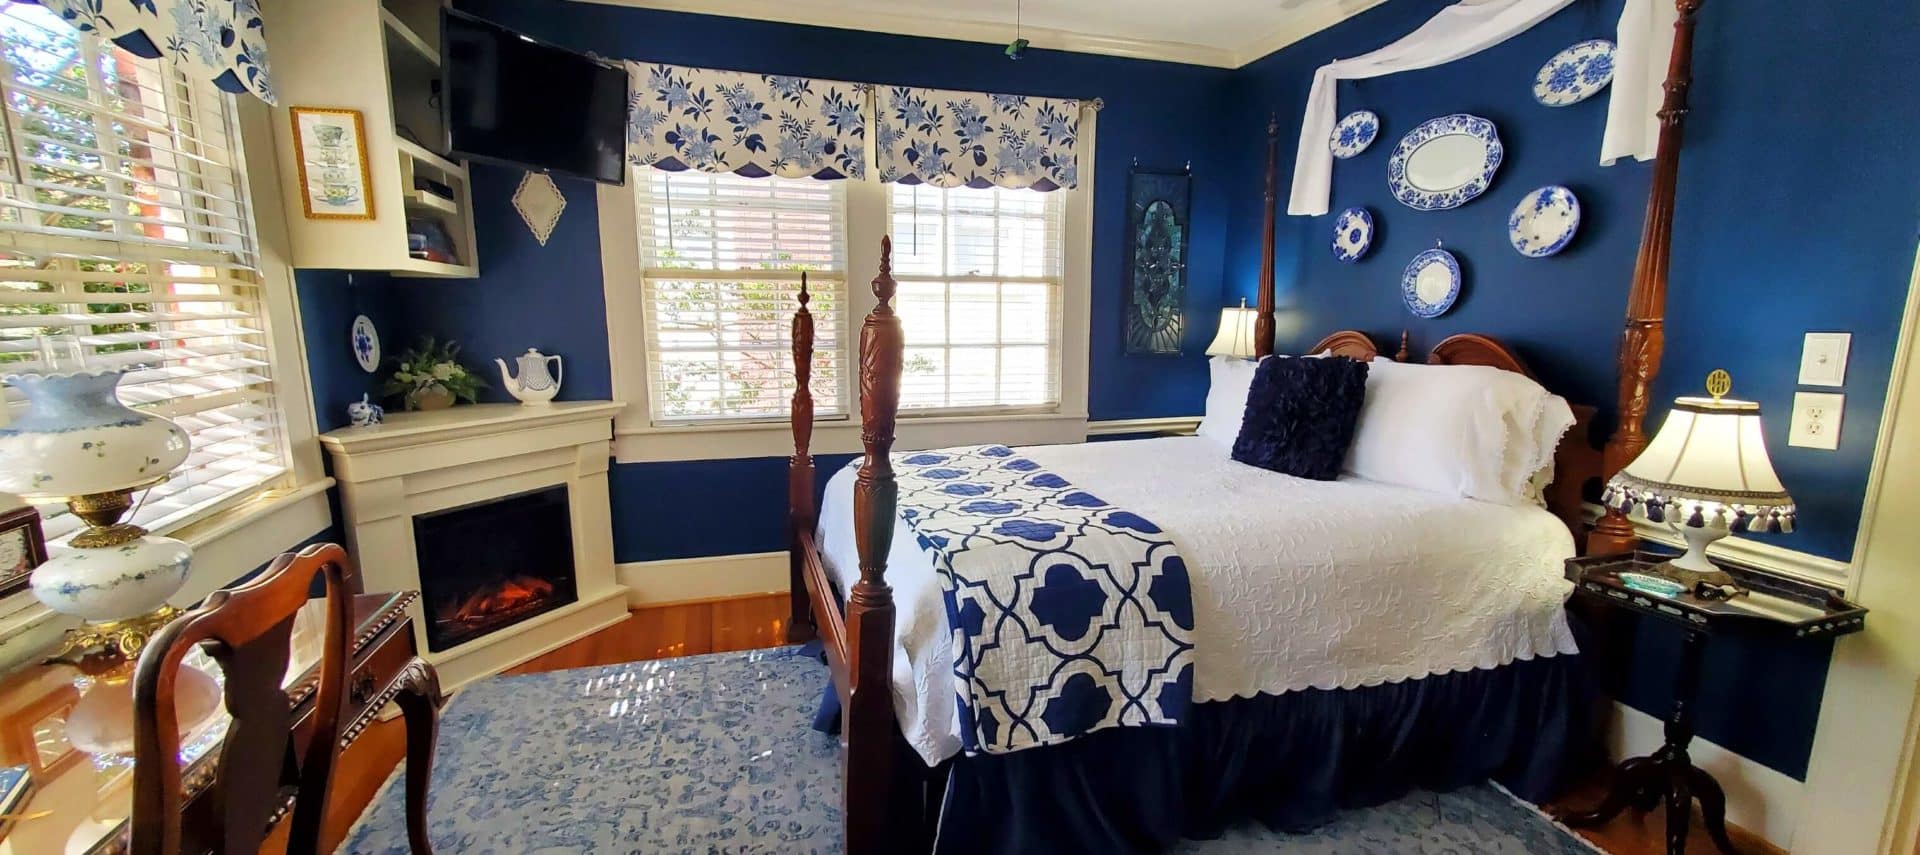 Queen bed with white bed spread in blue room with lit fireplace.